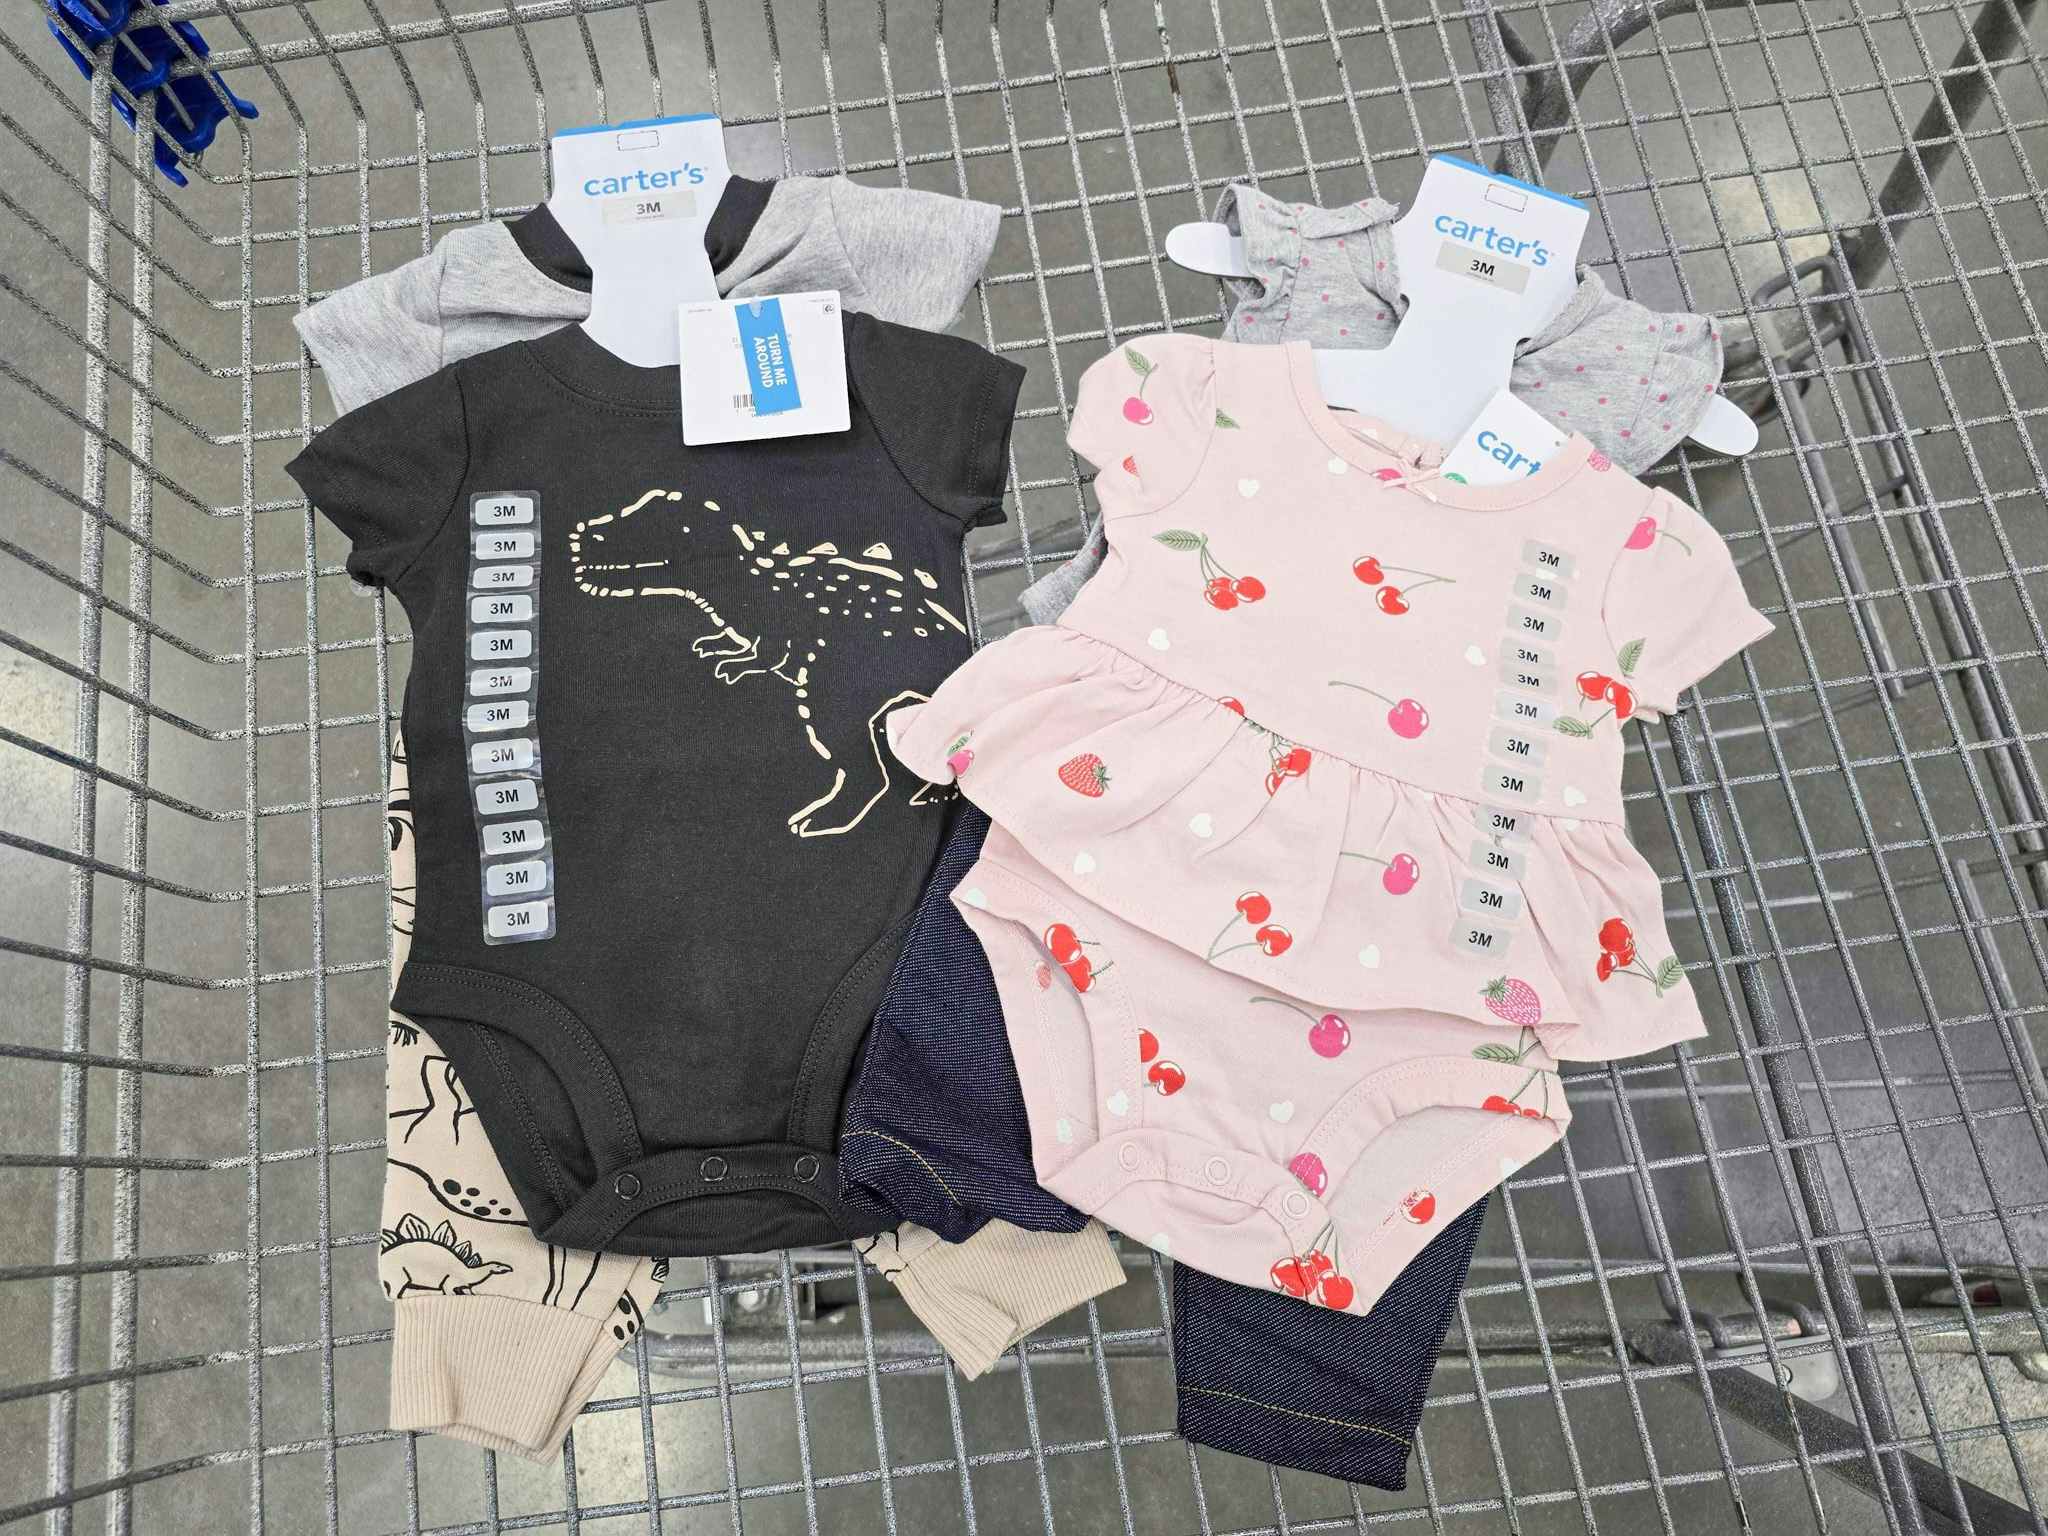 2 carters baby outfits in a cart